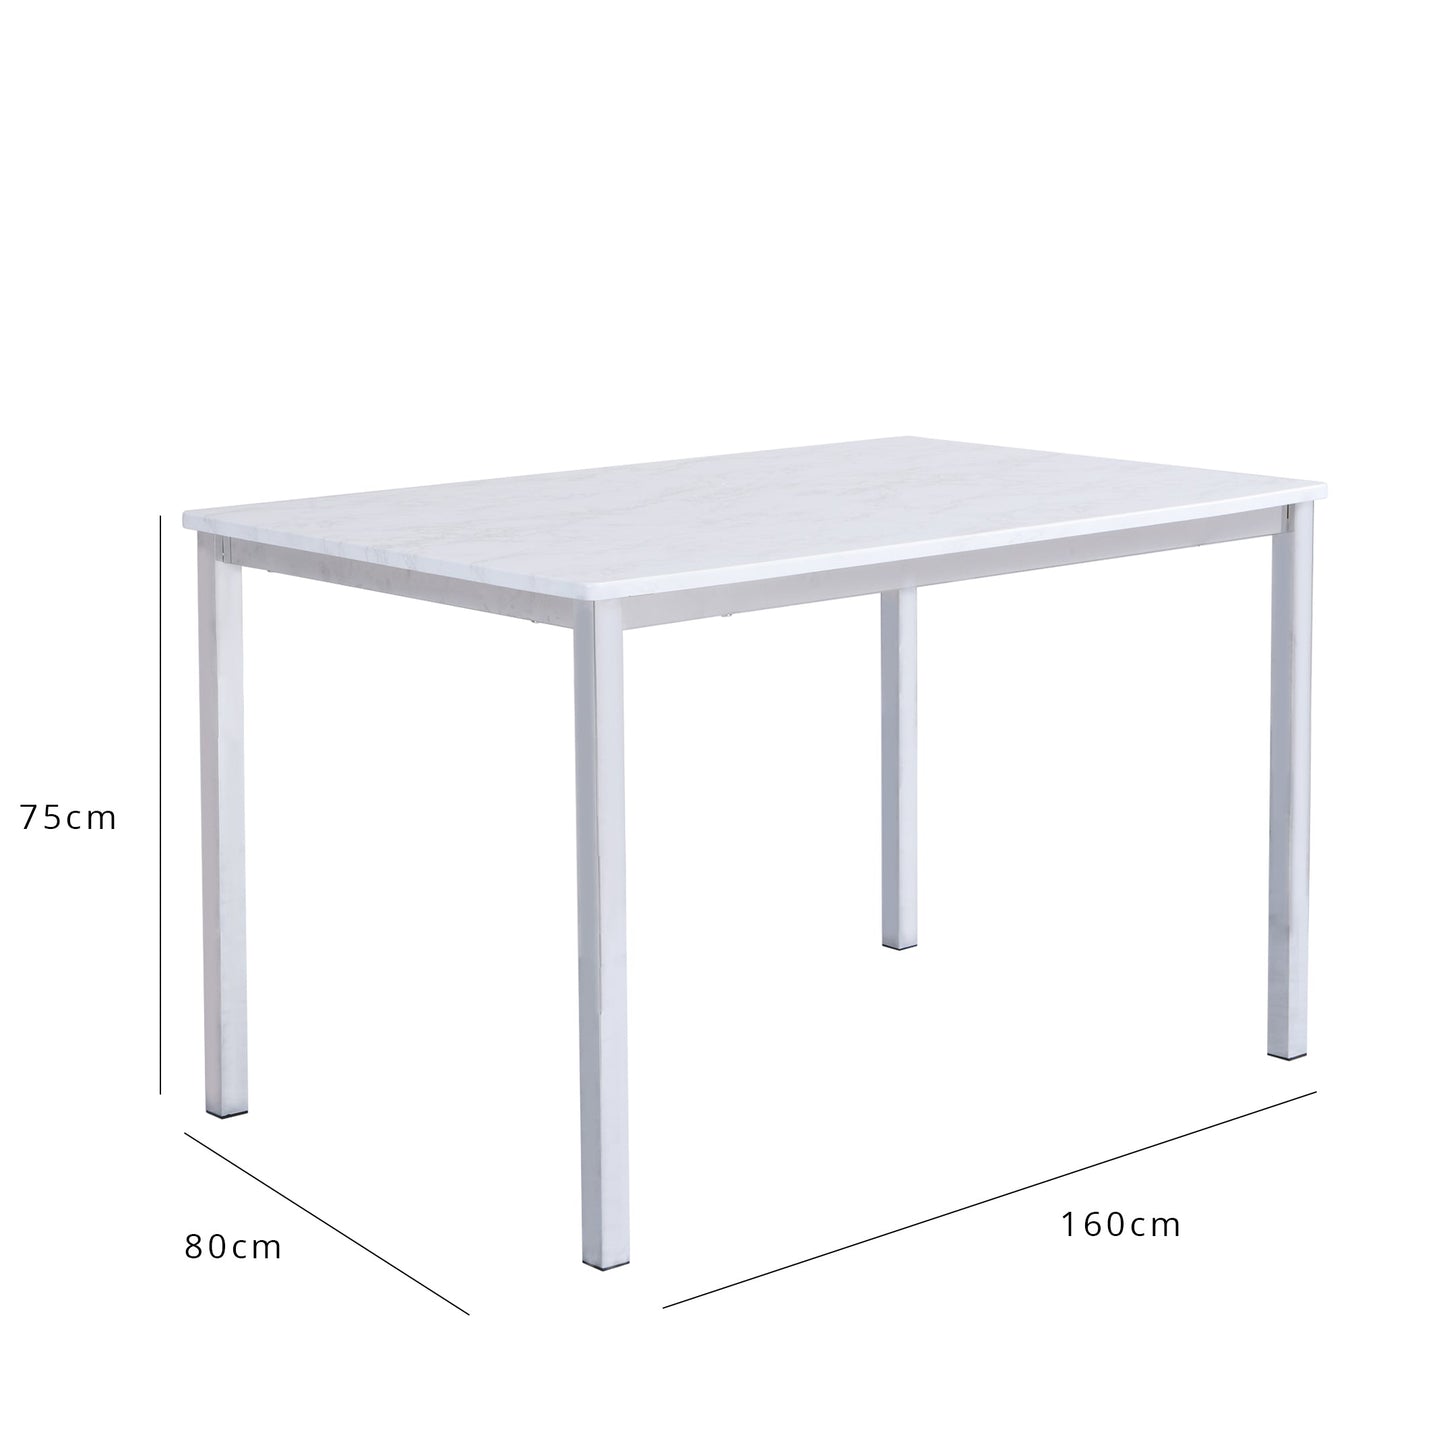 Milo dining table - 6 seater - marble effect and chrome - Laura James